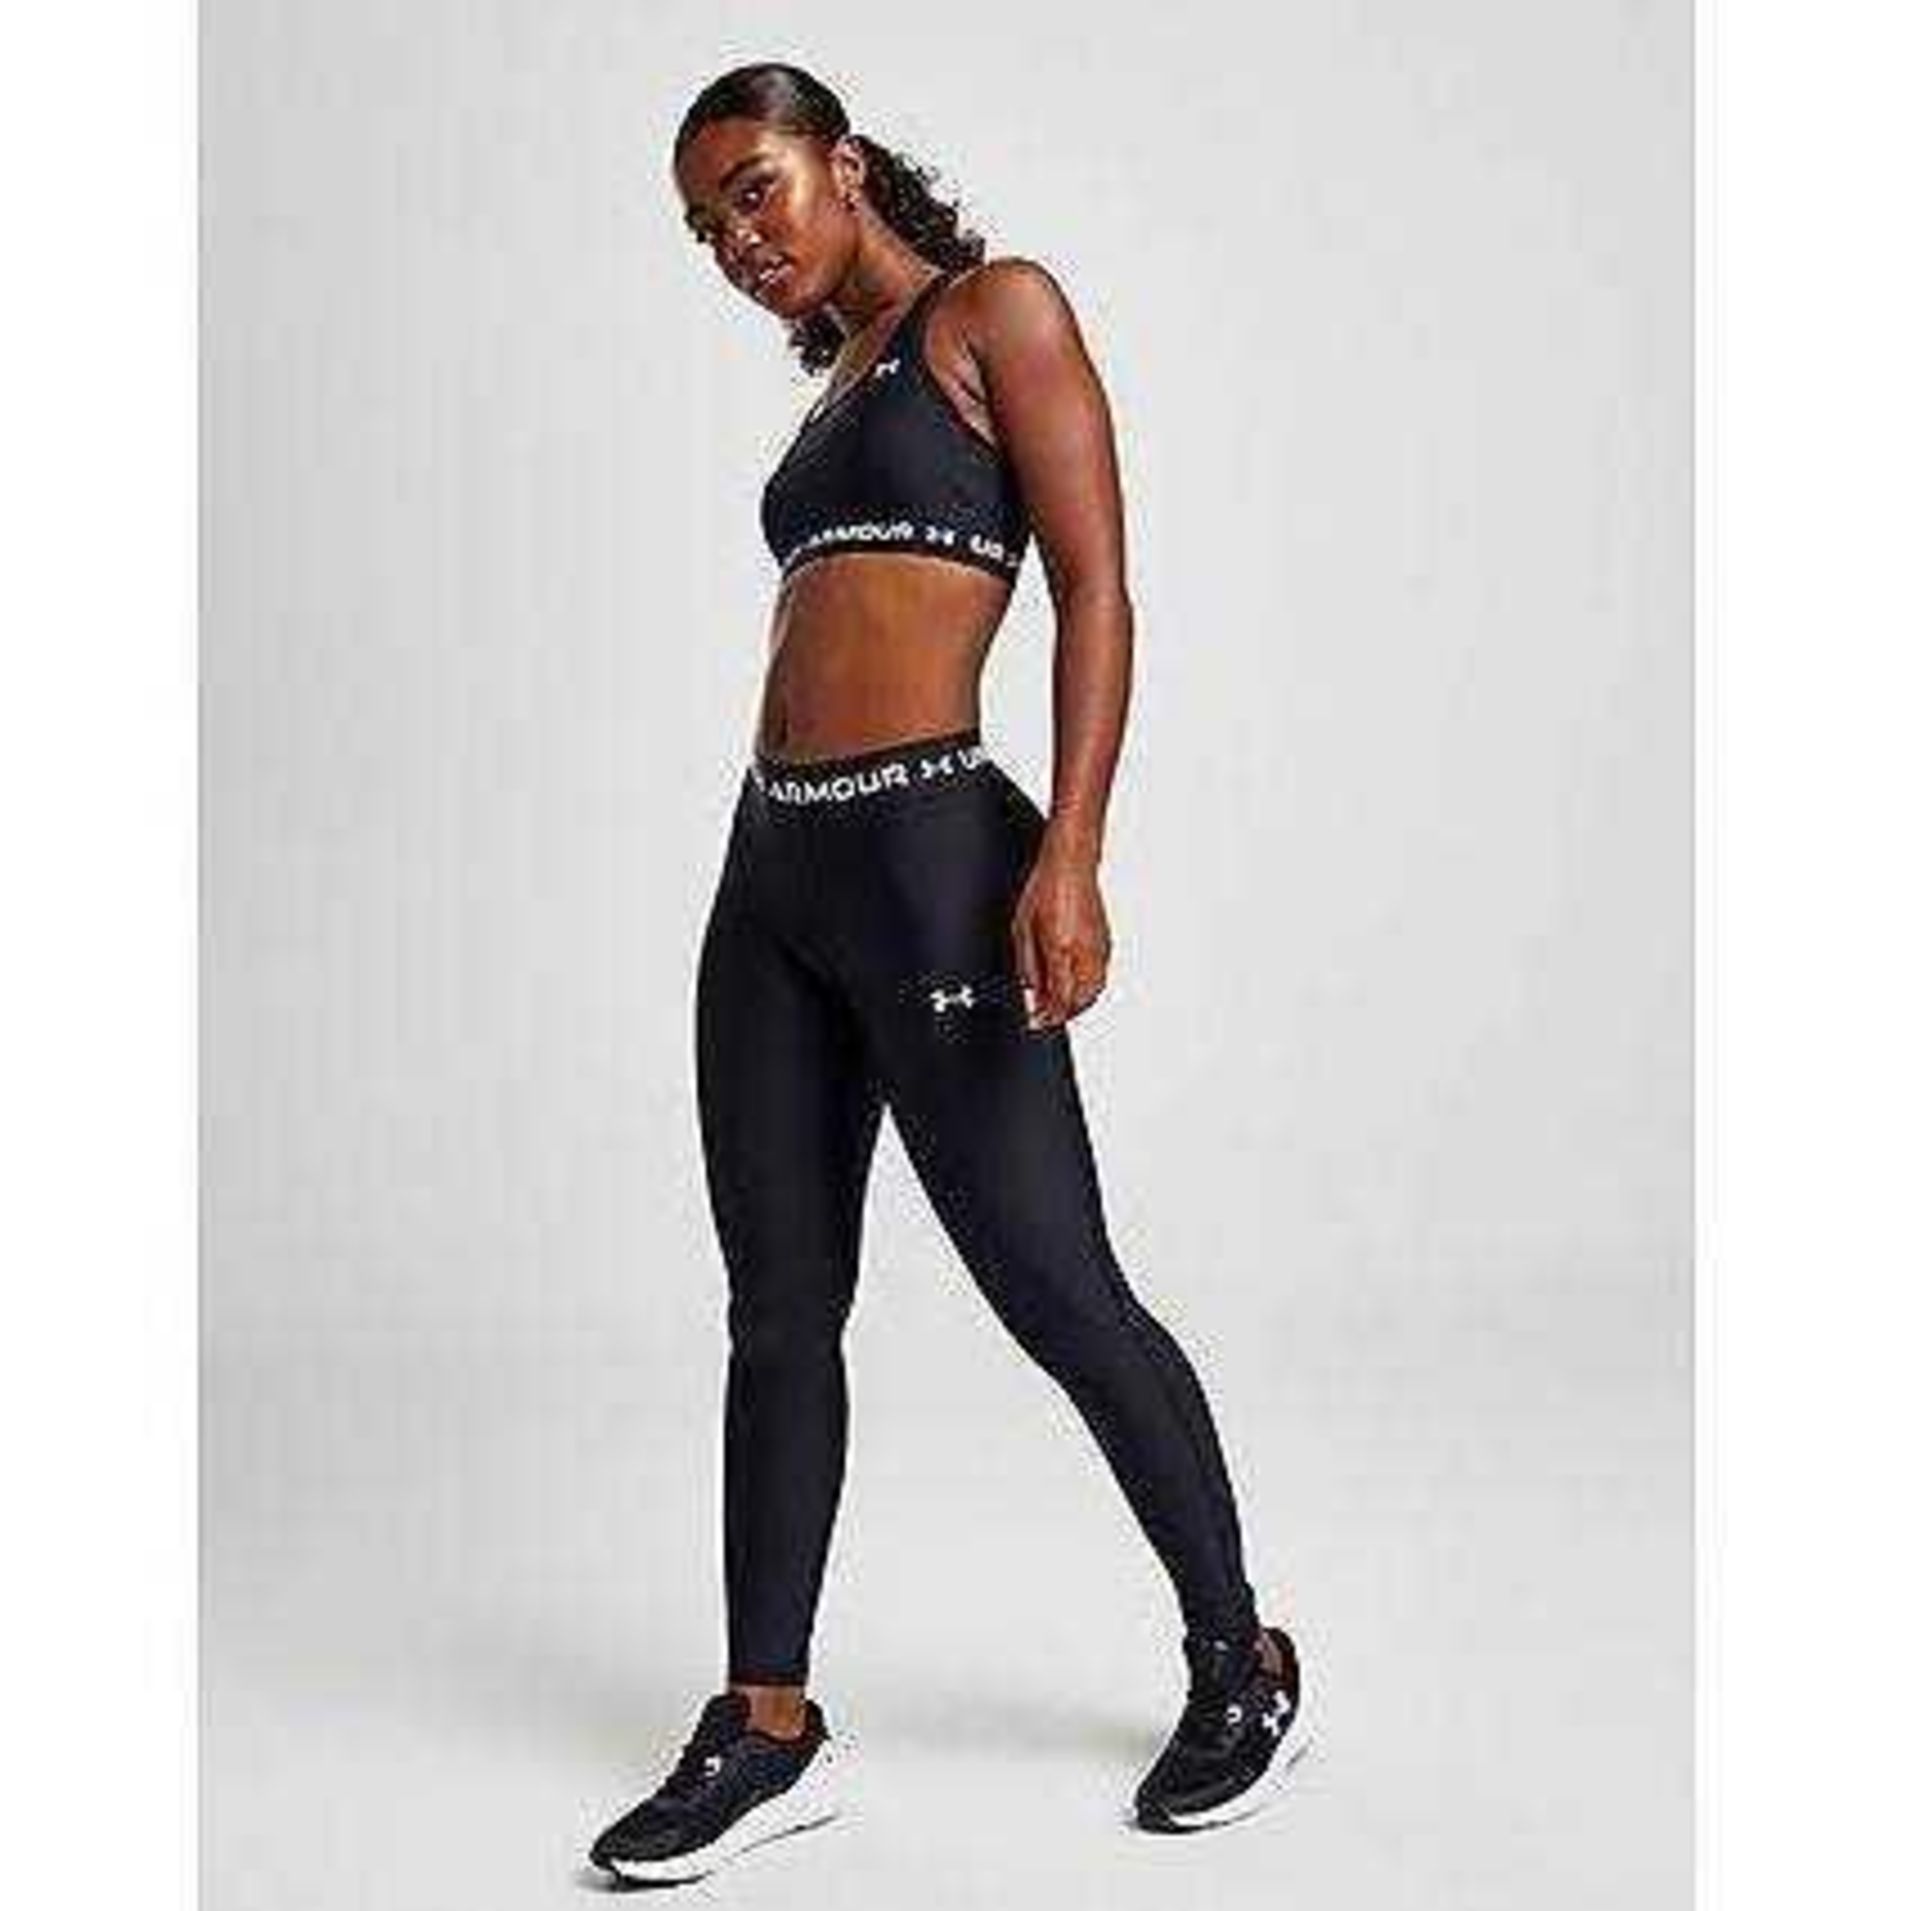 RRP £270 Box To Contain 11 Brand New Tagged Pairs Of Under Armour Branded Leggings (Sizes May Vary)